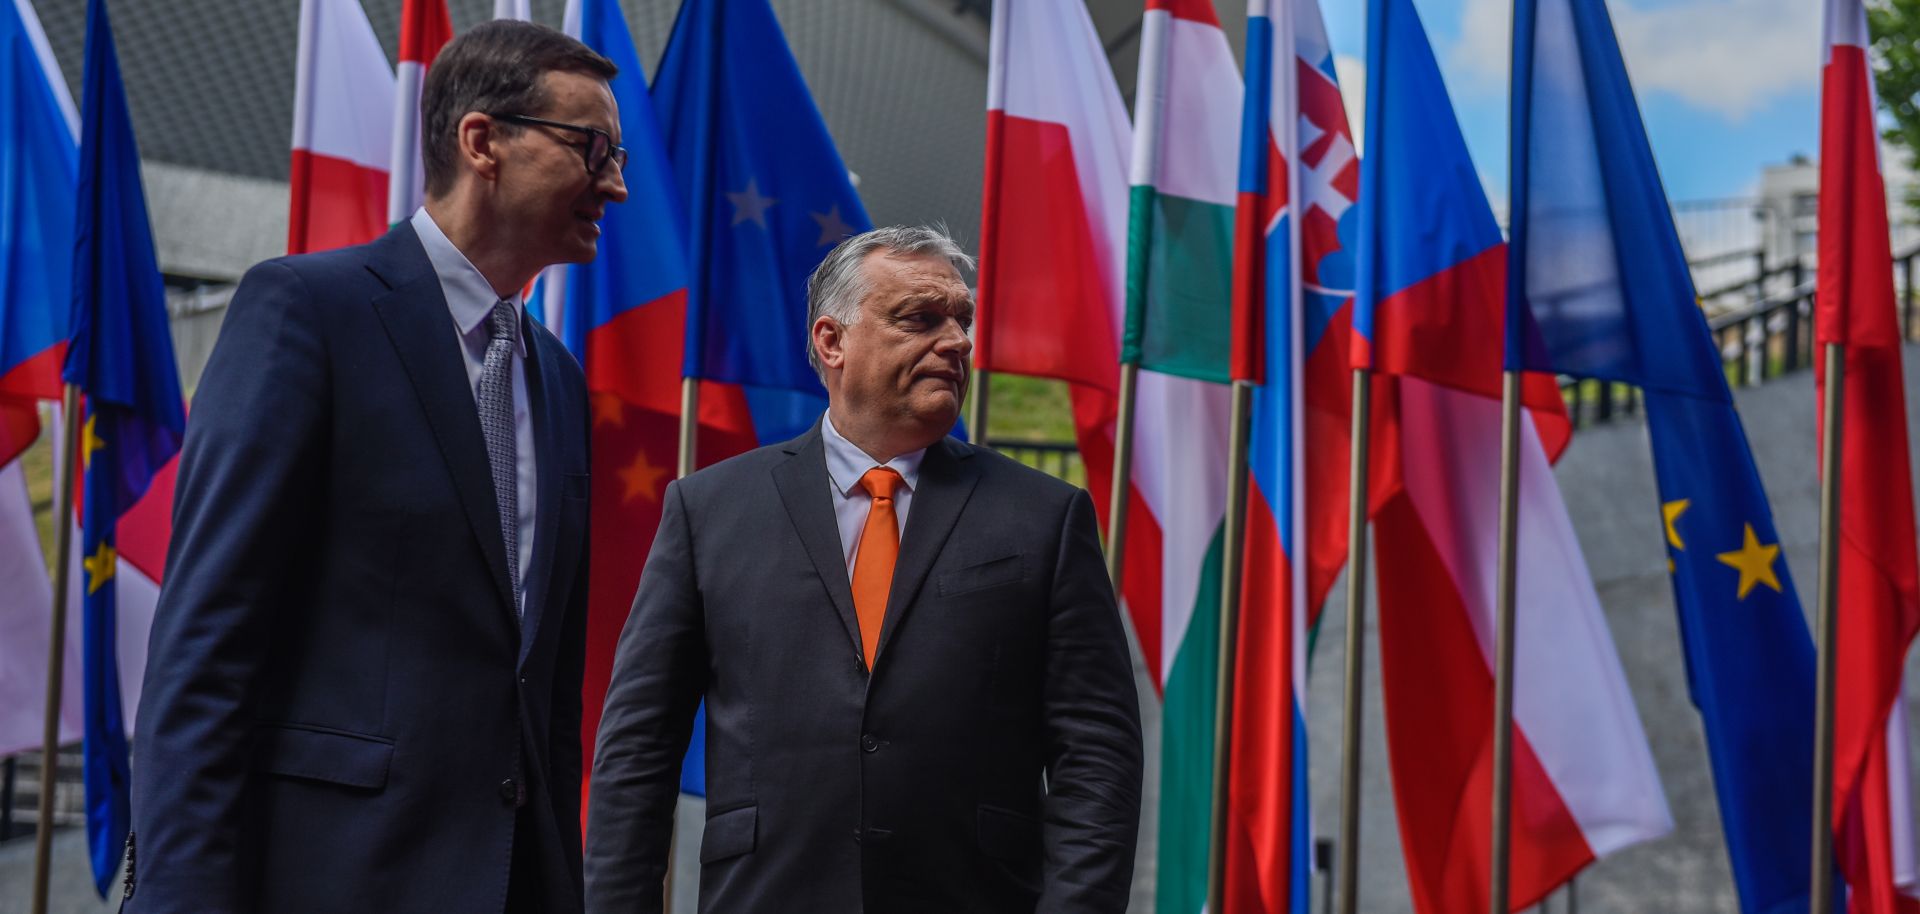 Polish Prime Minister Mateusz Morawiecki (left) welcomes his Hungarian counterpart, Viktor Orban, ahead of a meeting in Katowice, Poland, on June 30, 2021. 